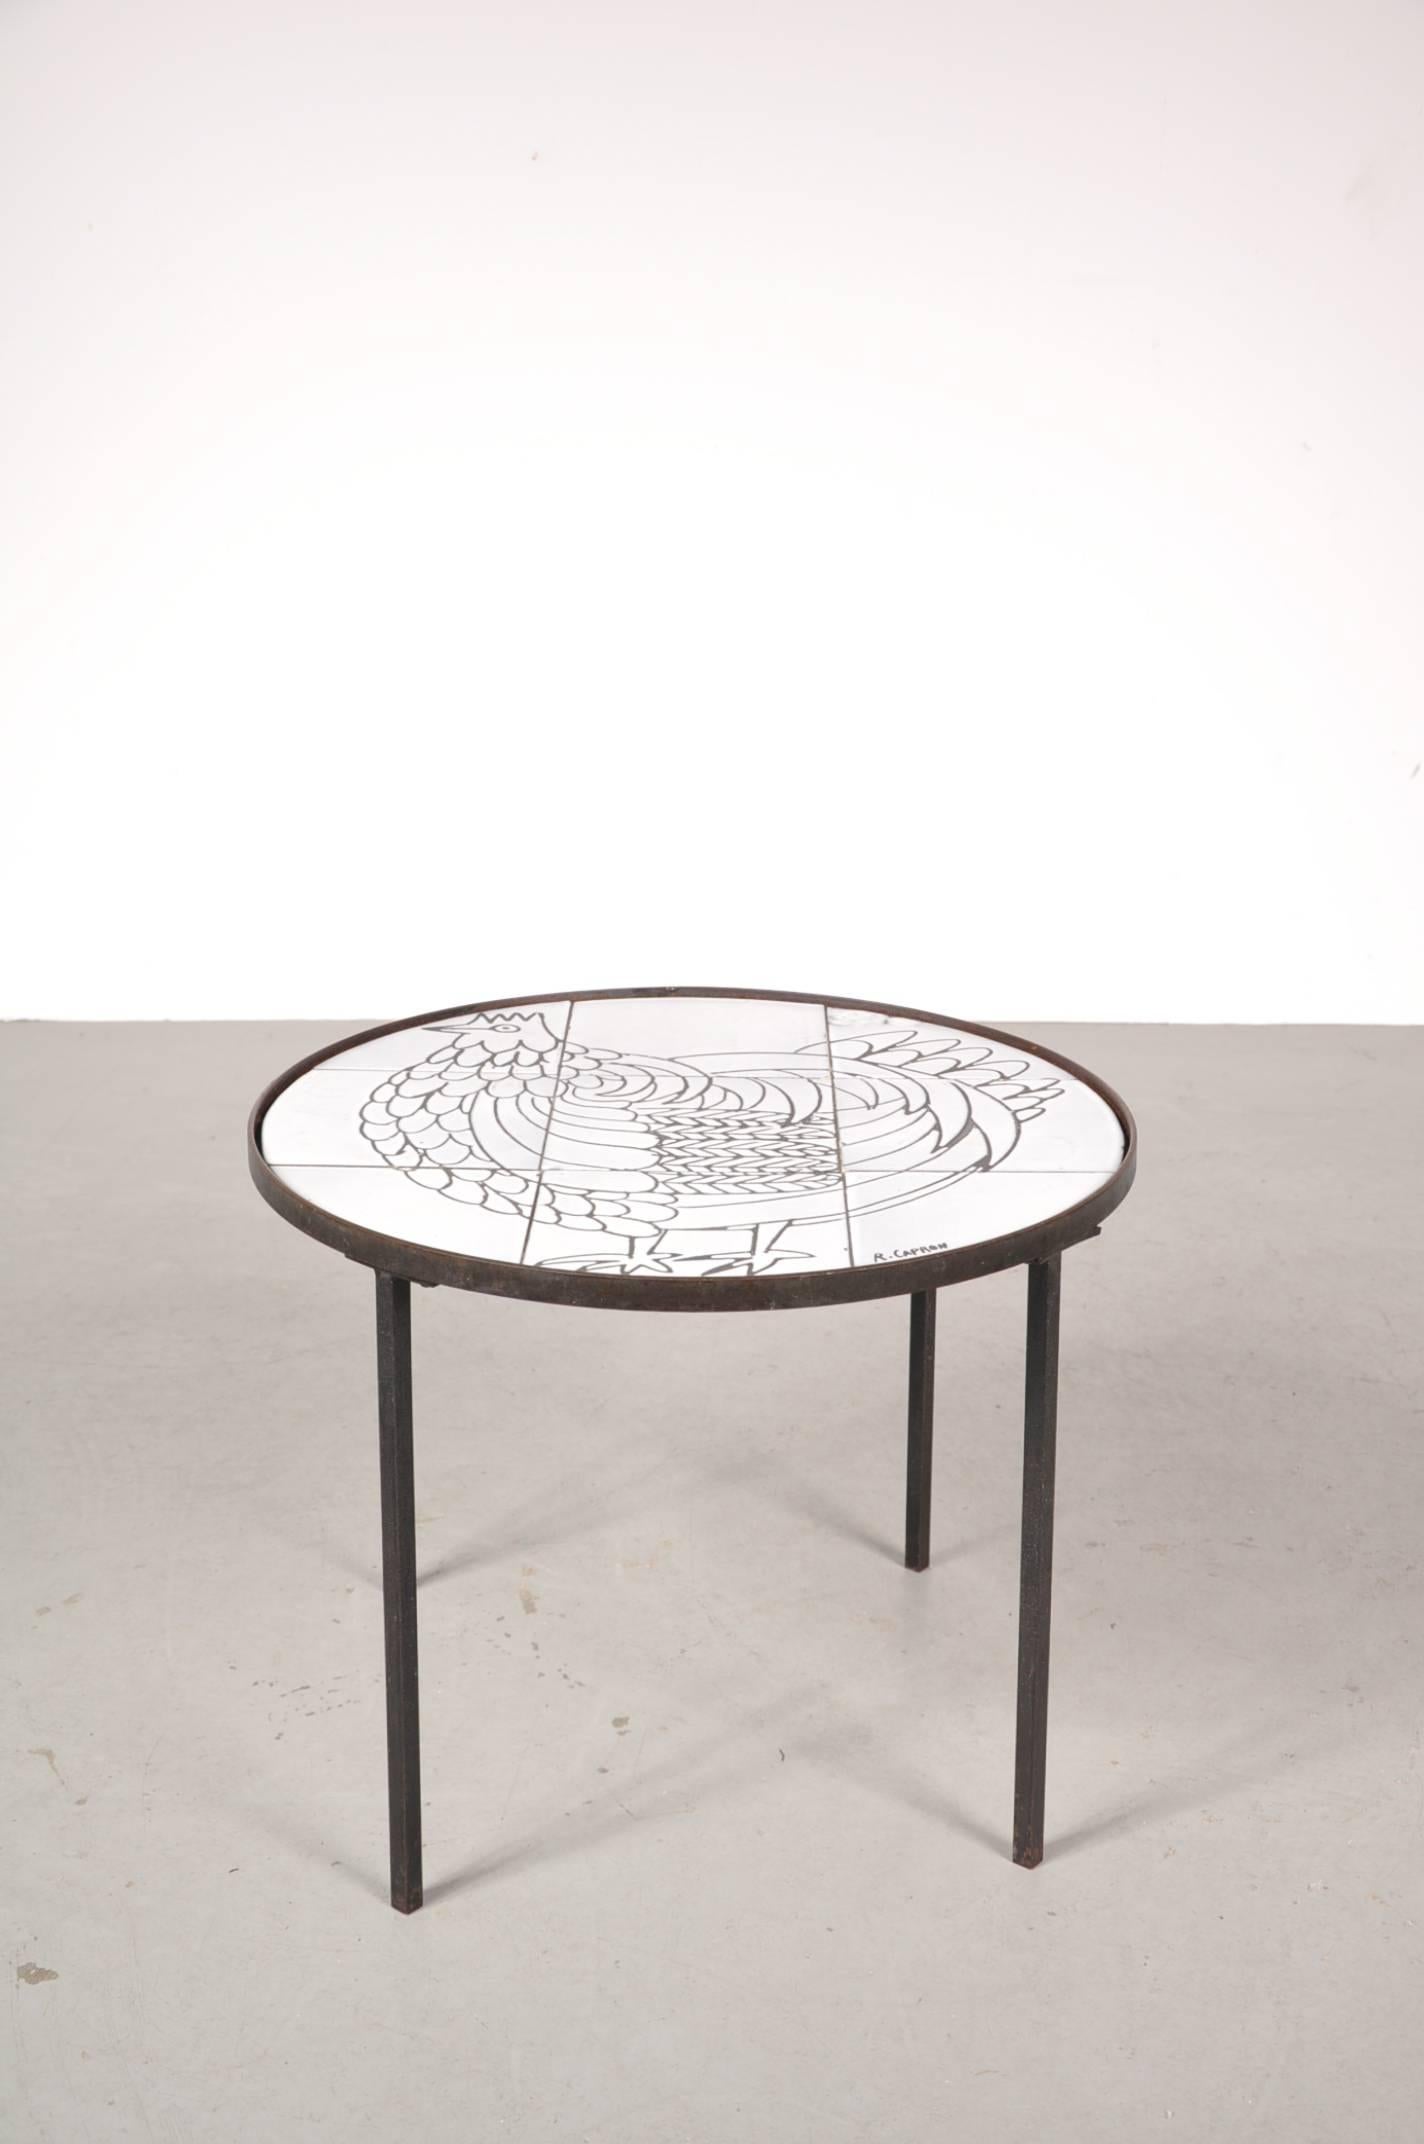 Stunning side table by Roger Capron, manufactured in France around 1950.

The table has a metal base and a beautiful ceramic top. The top consists of nine ceramic tiles with a unique drawing of a rooster and a hand written signature 